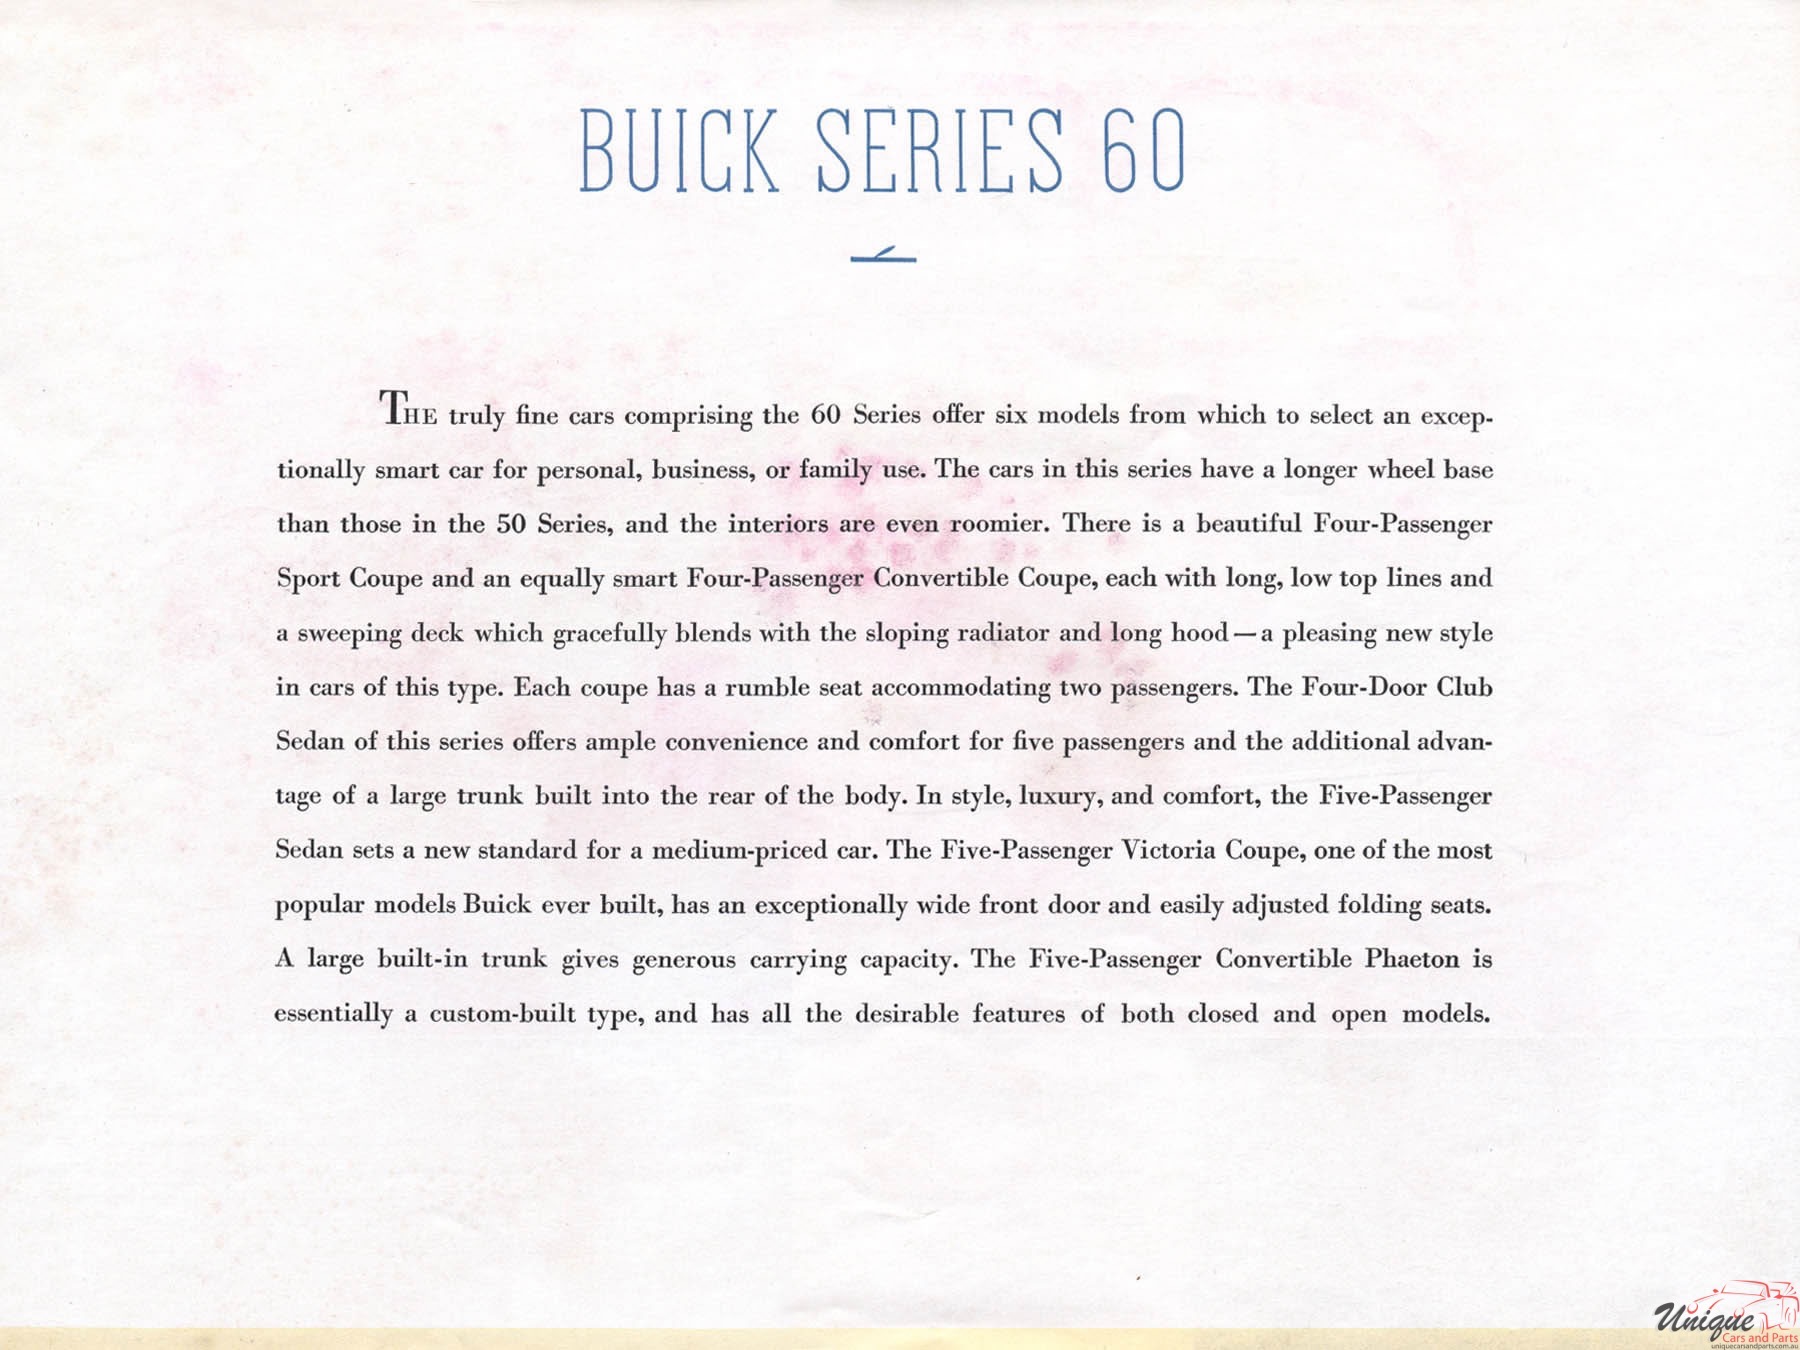 1935 Buick Brochure Page 38